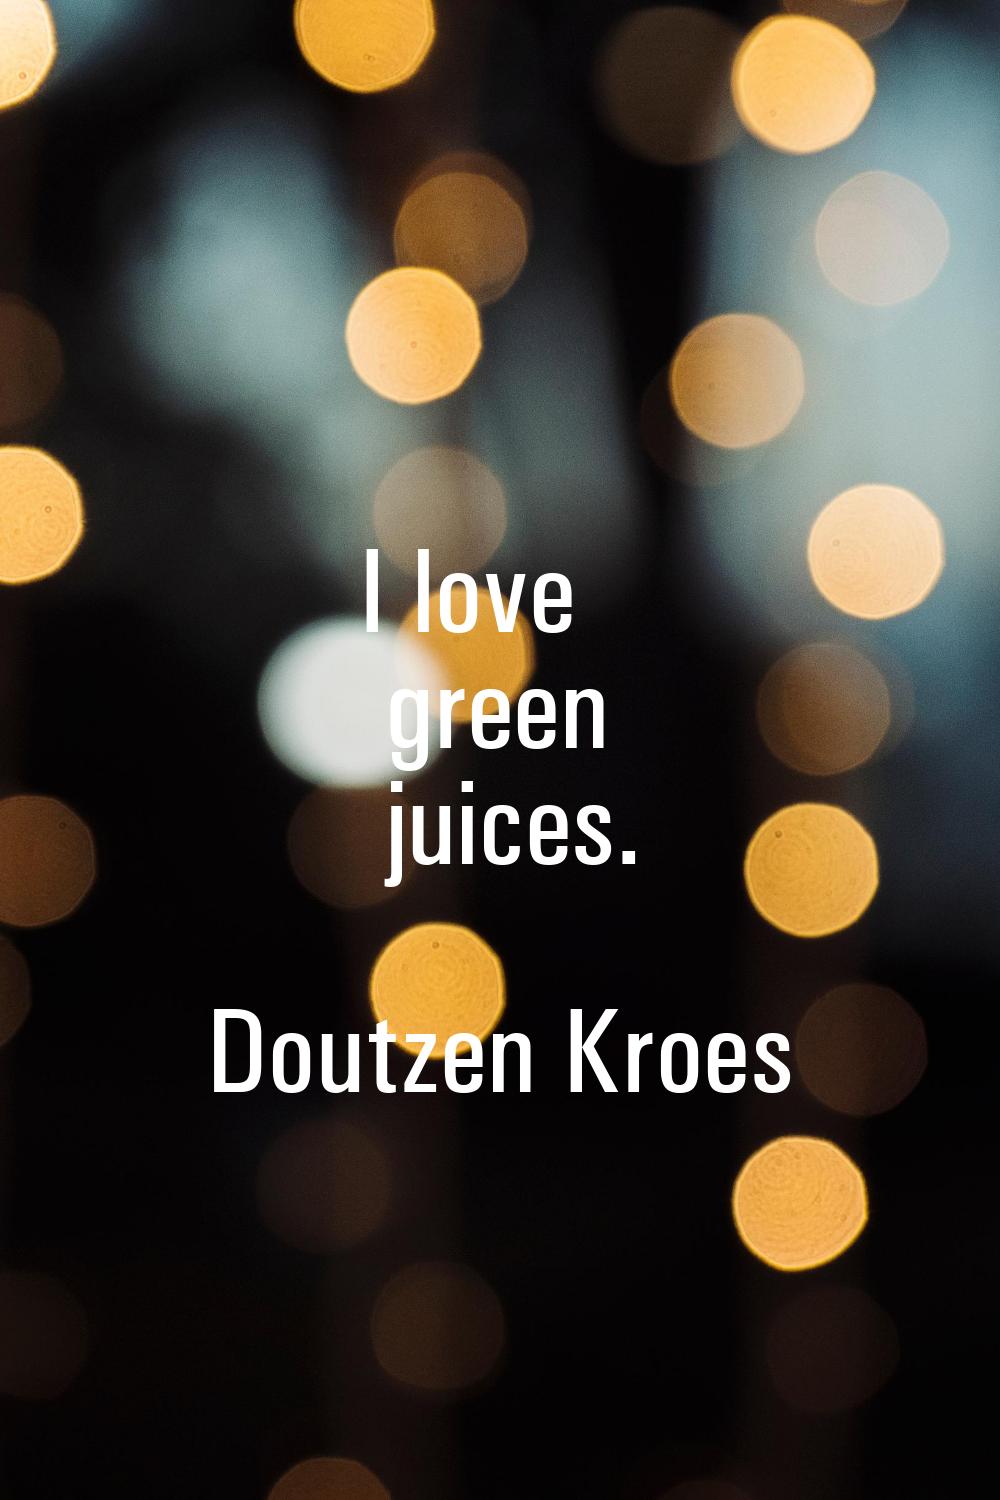 I love green juices.